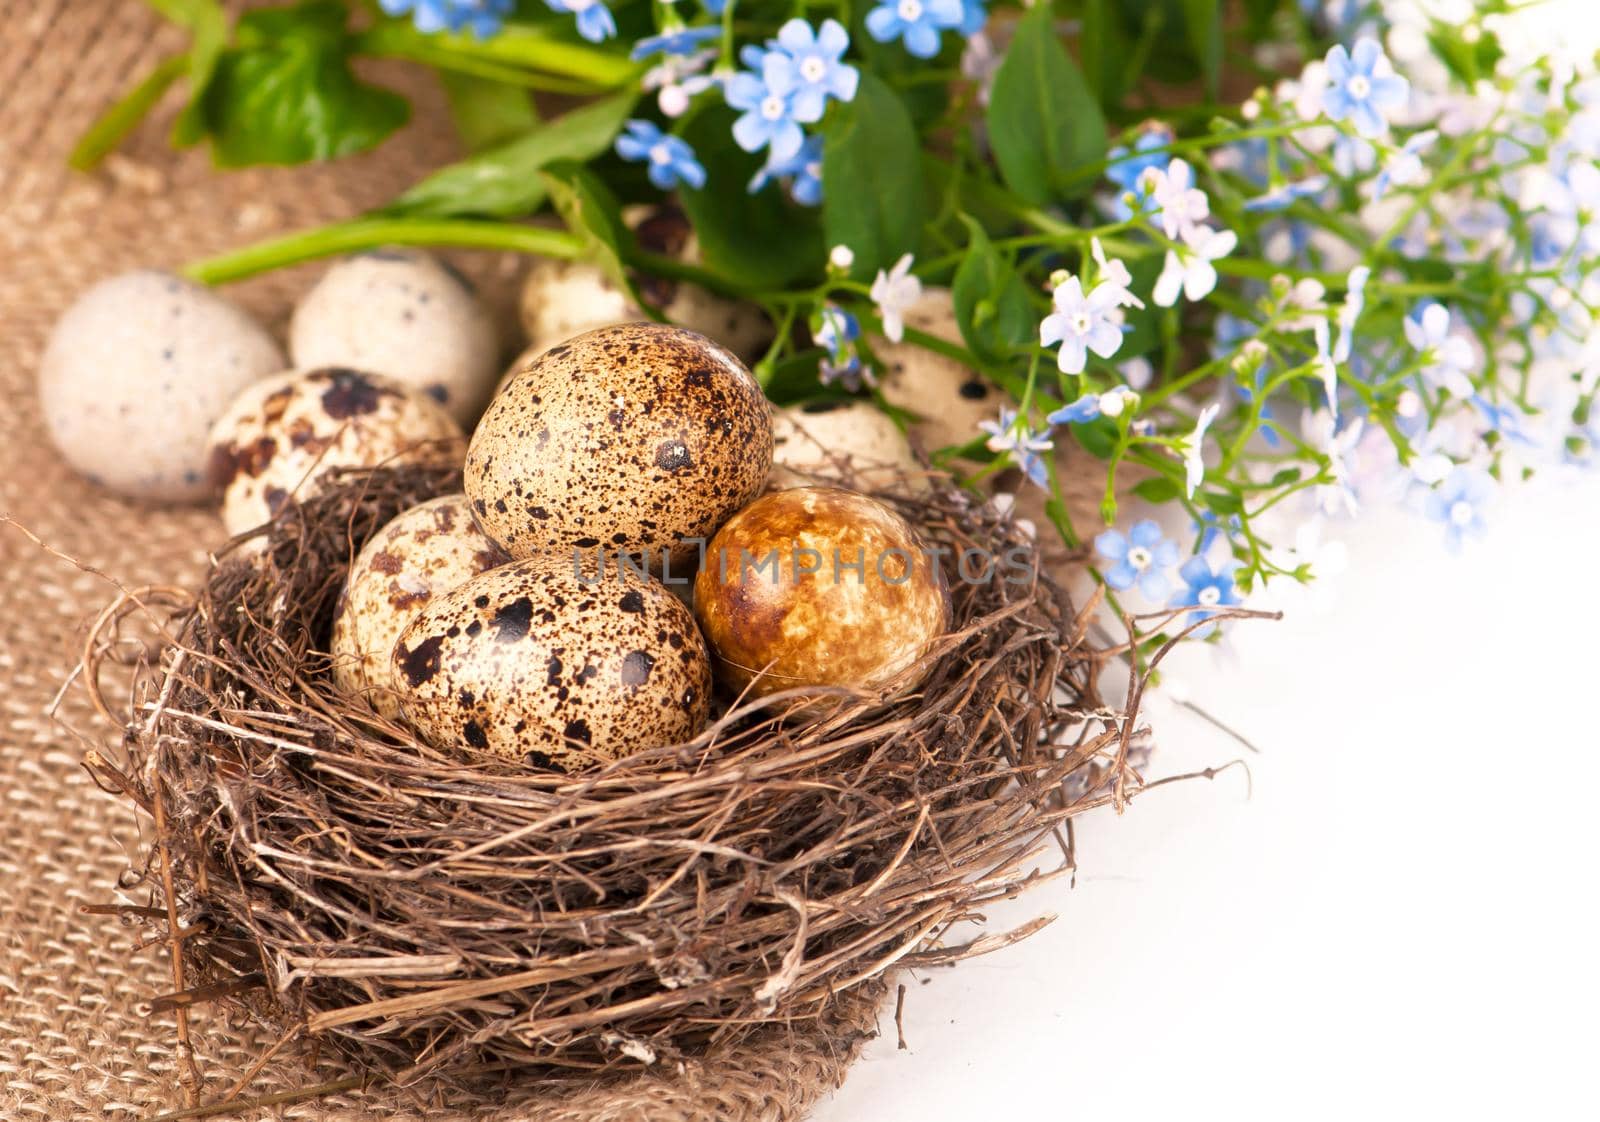 Nest with eggs and forget-me-nots on a cloth by aprilphoto